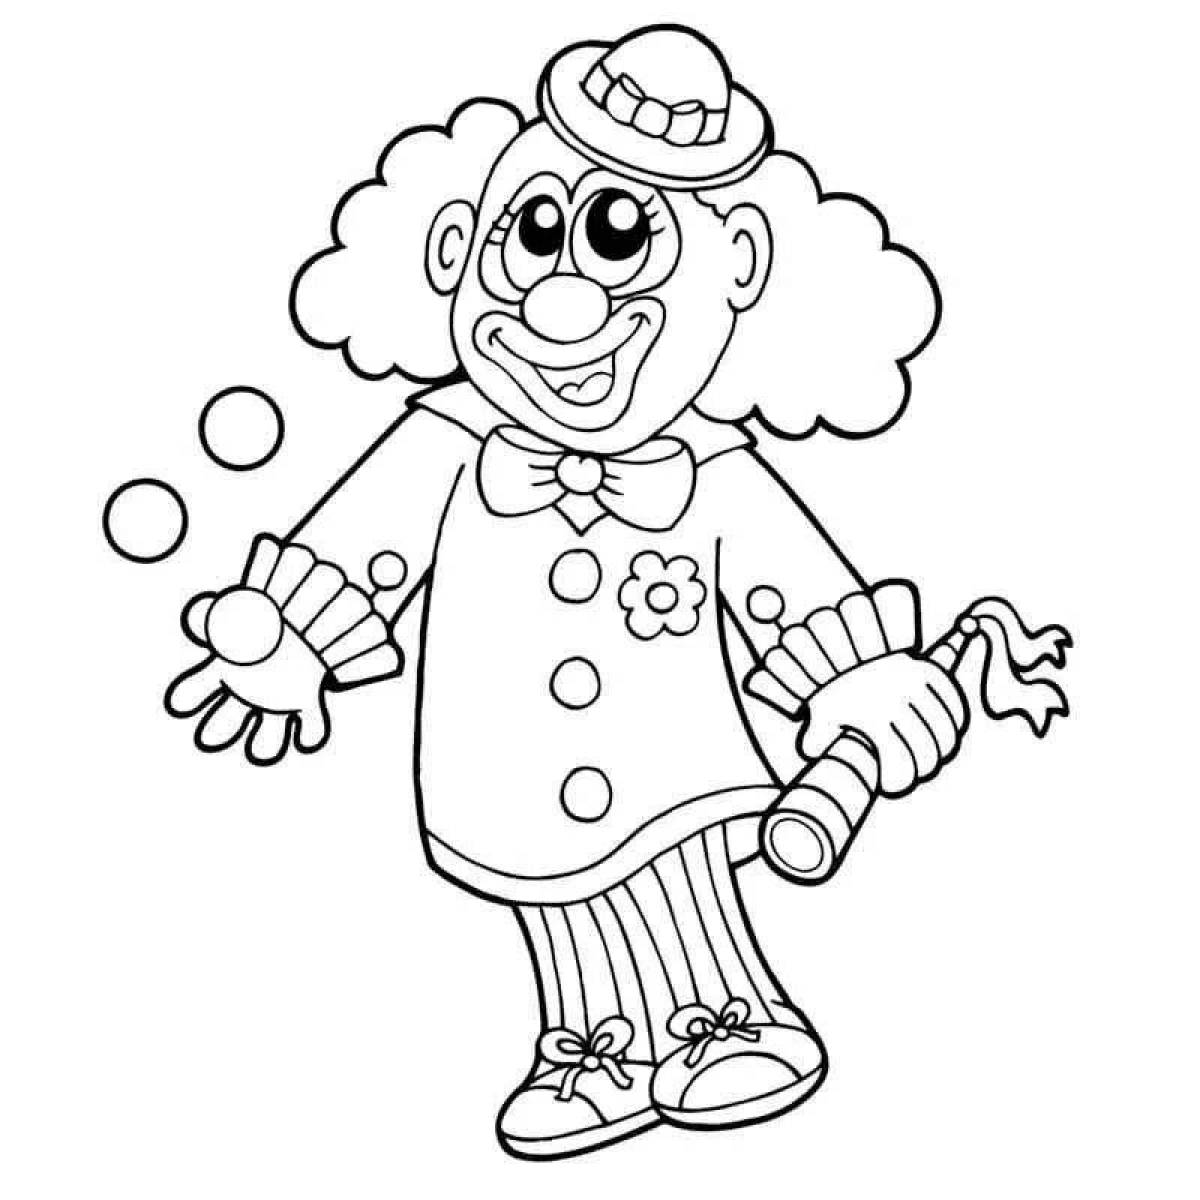 Playful coloring funny clown